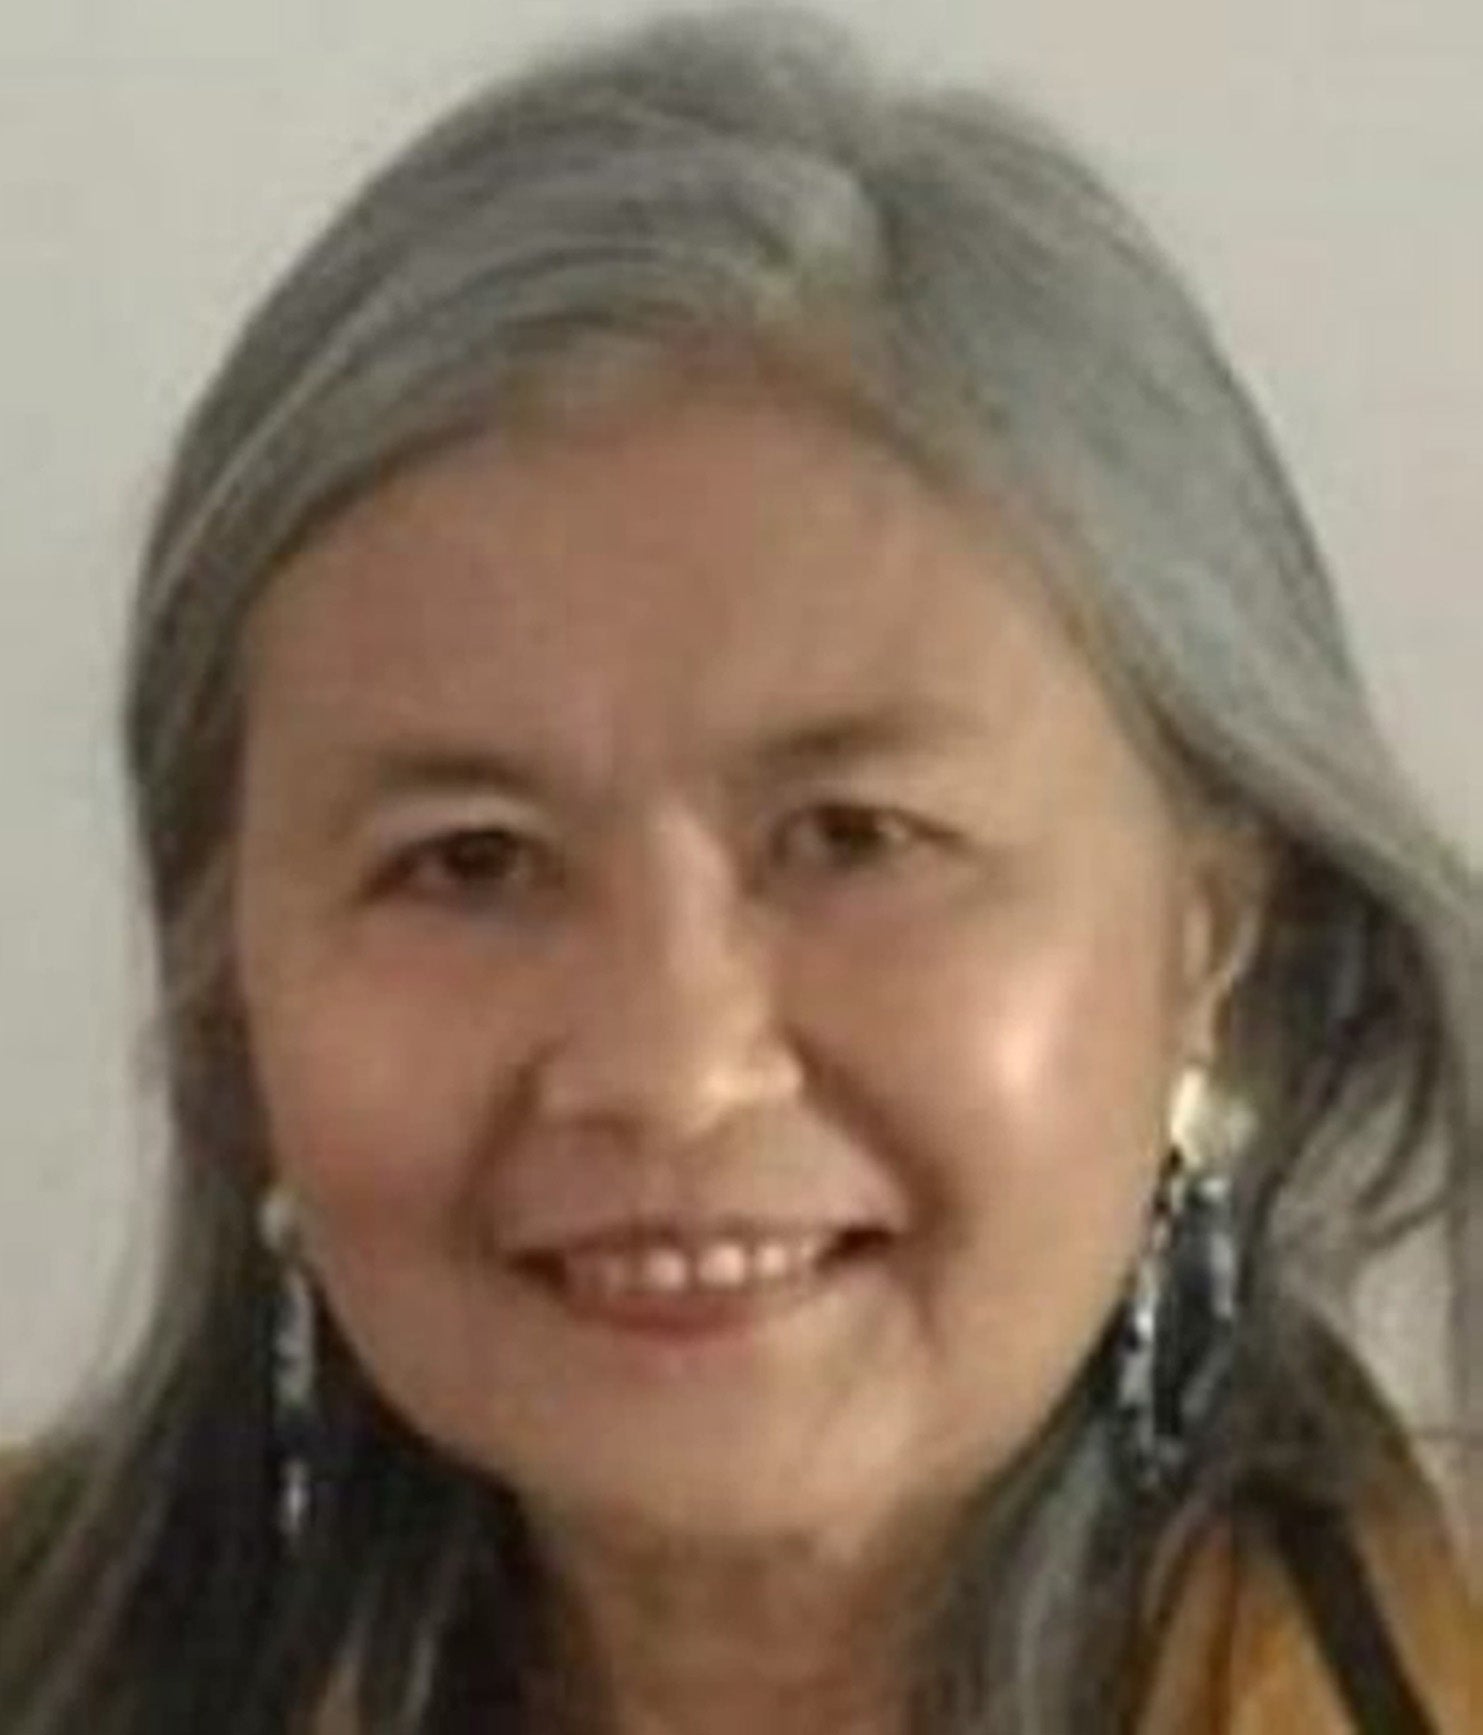 Mee Kuen Chong, 67, was reported missing in London on 11 June, her remains were later found in Devon